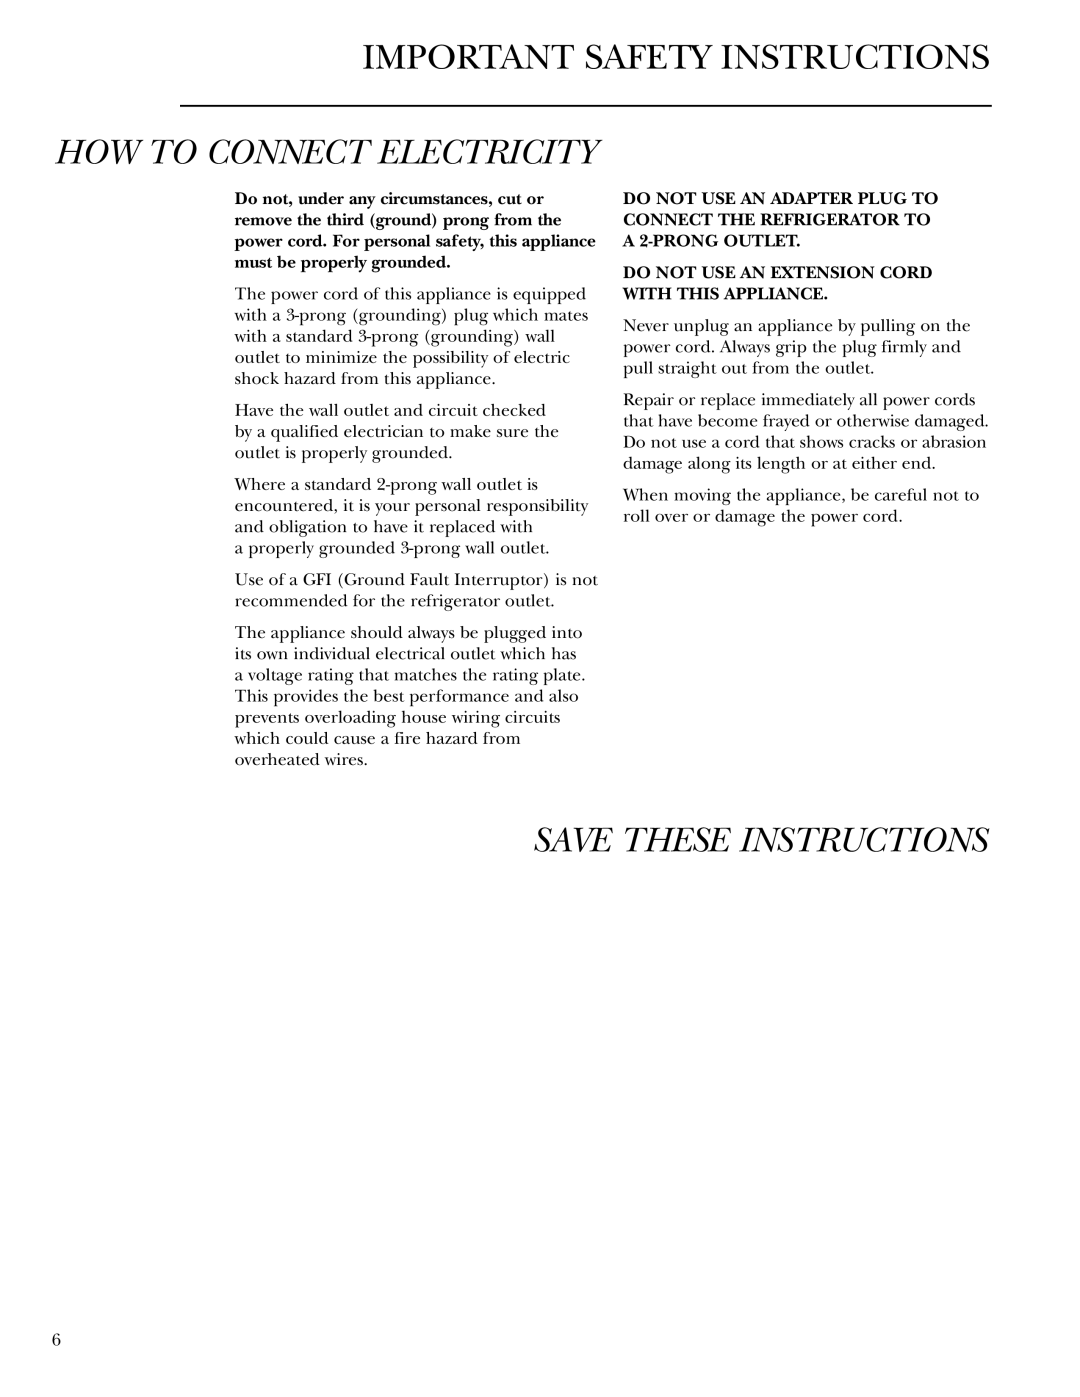 GE Monogram 42, 48 owner manual How To Connect Electricity, Save These Instructions, Important Safety Instructions 